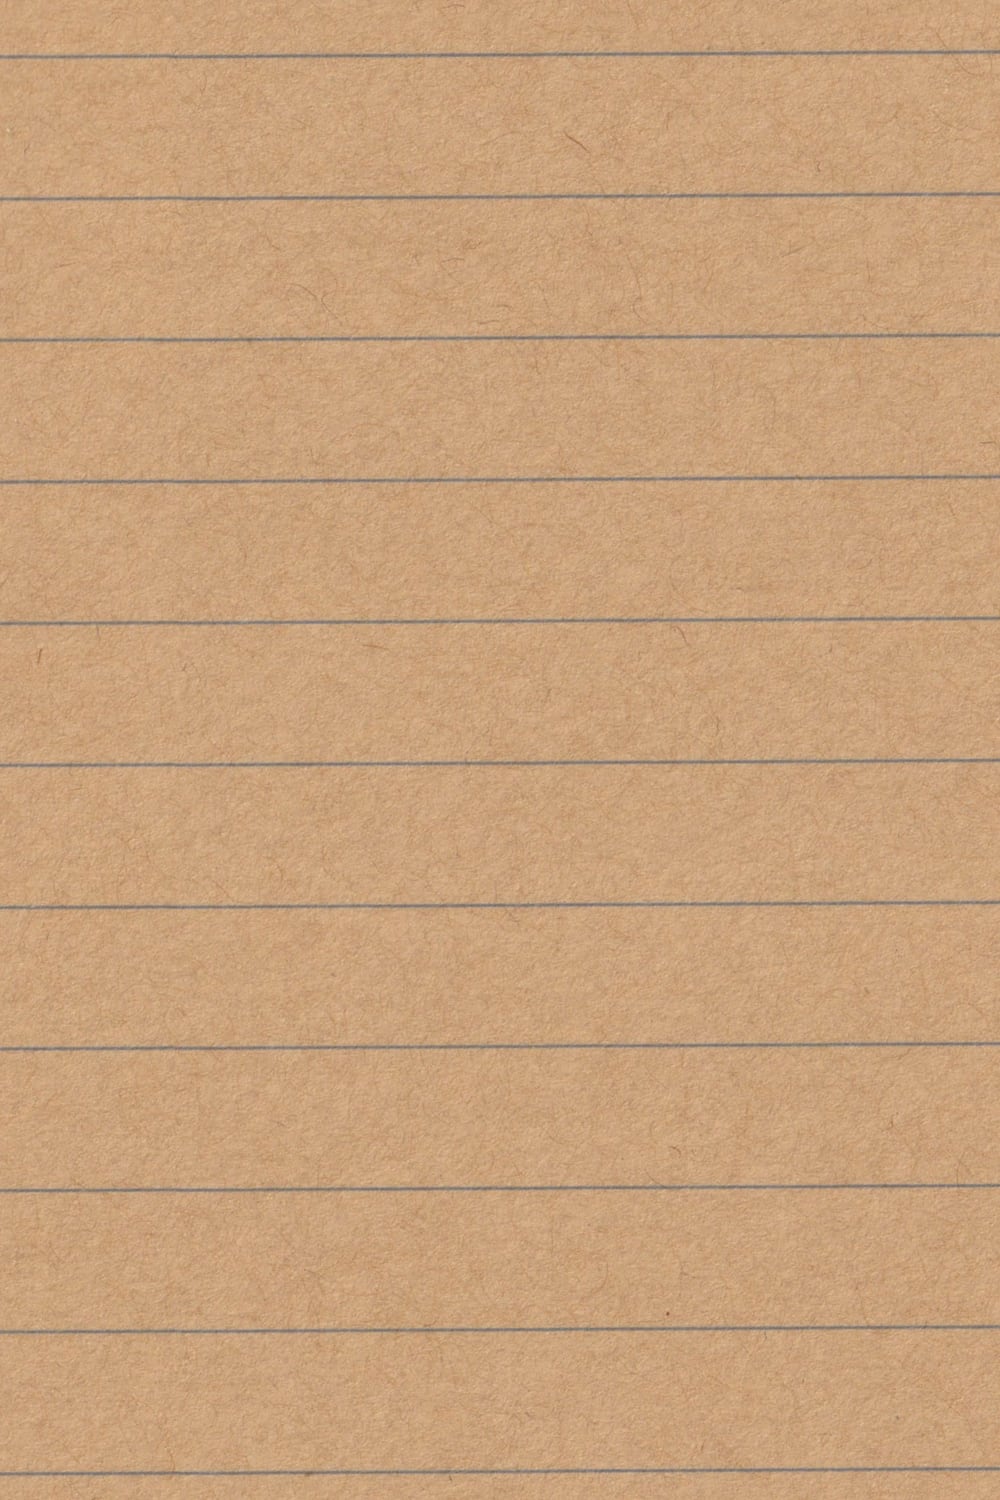 Ruled notepad paper - close up